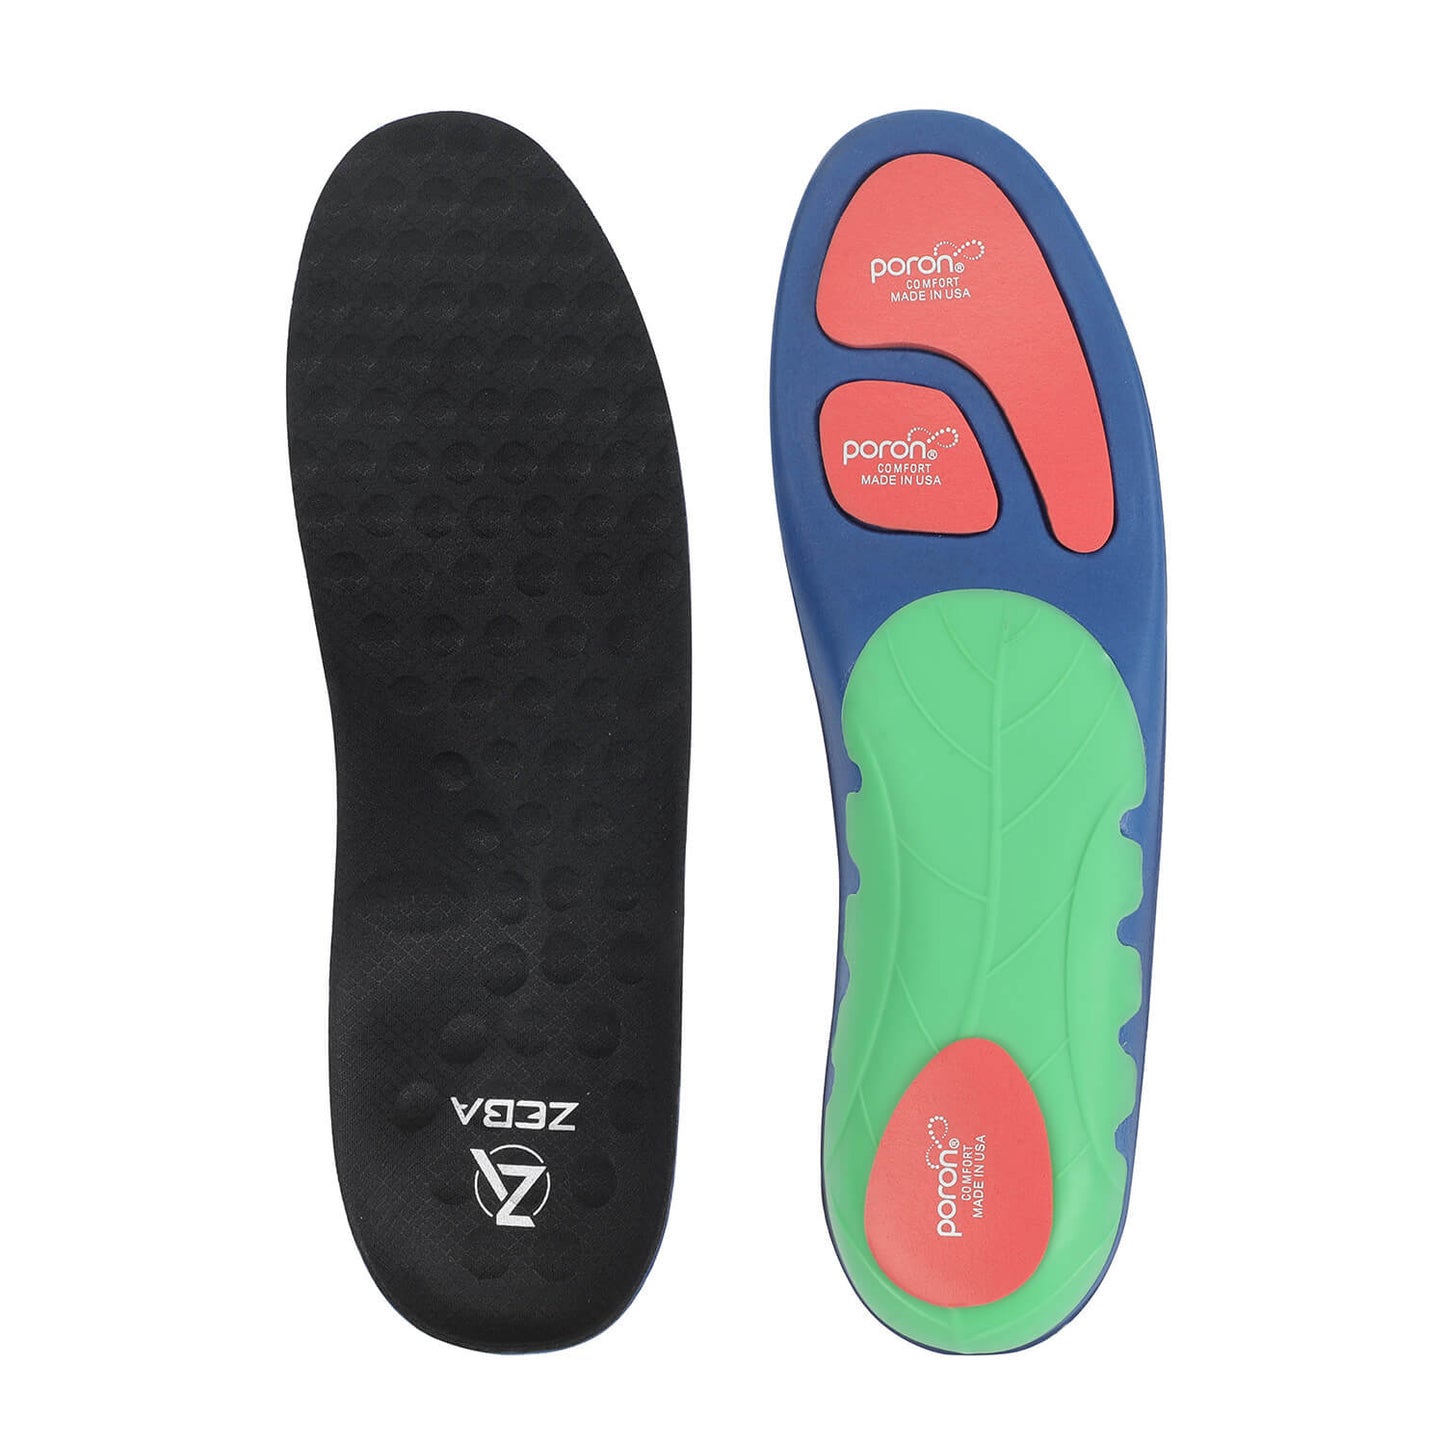 Zeba Arch Support Insoles (Size matches your shoe size order!)